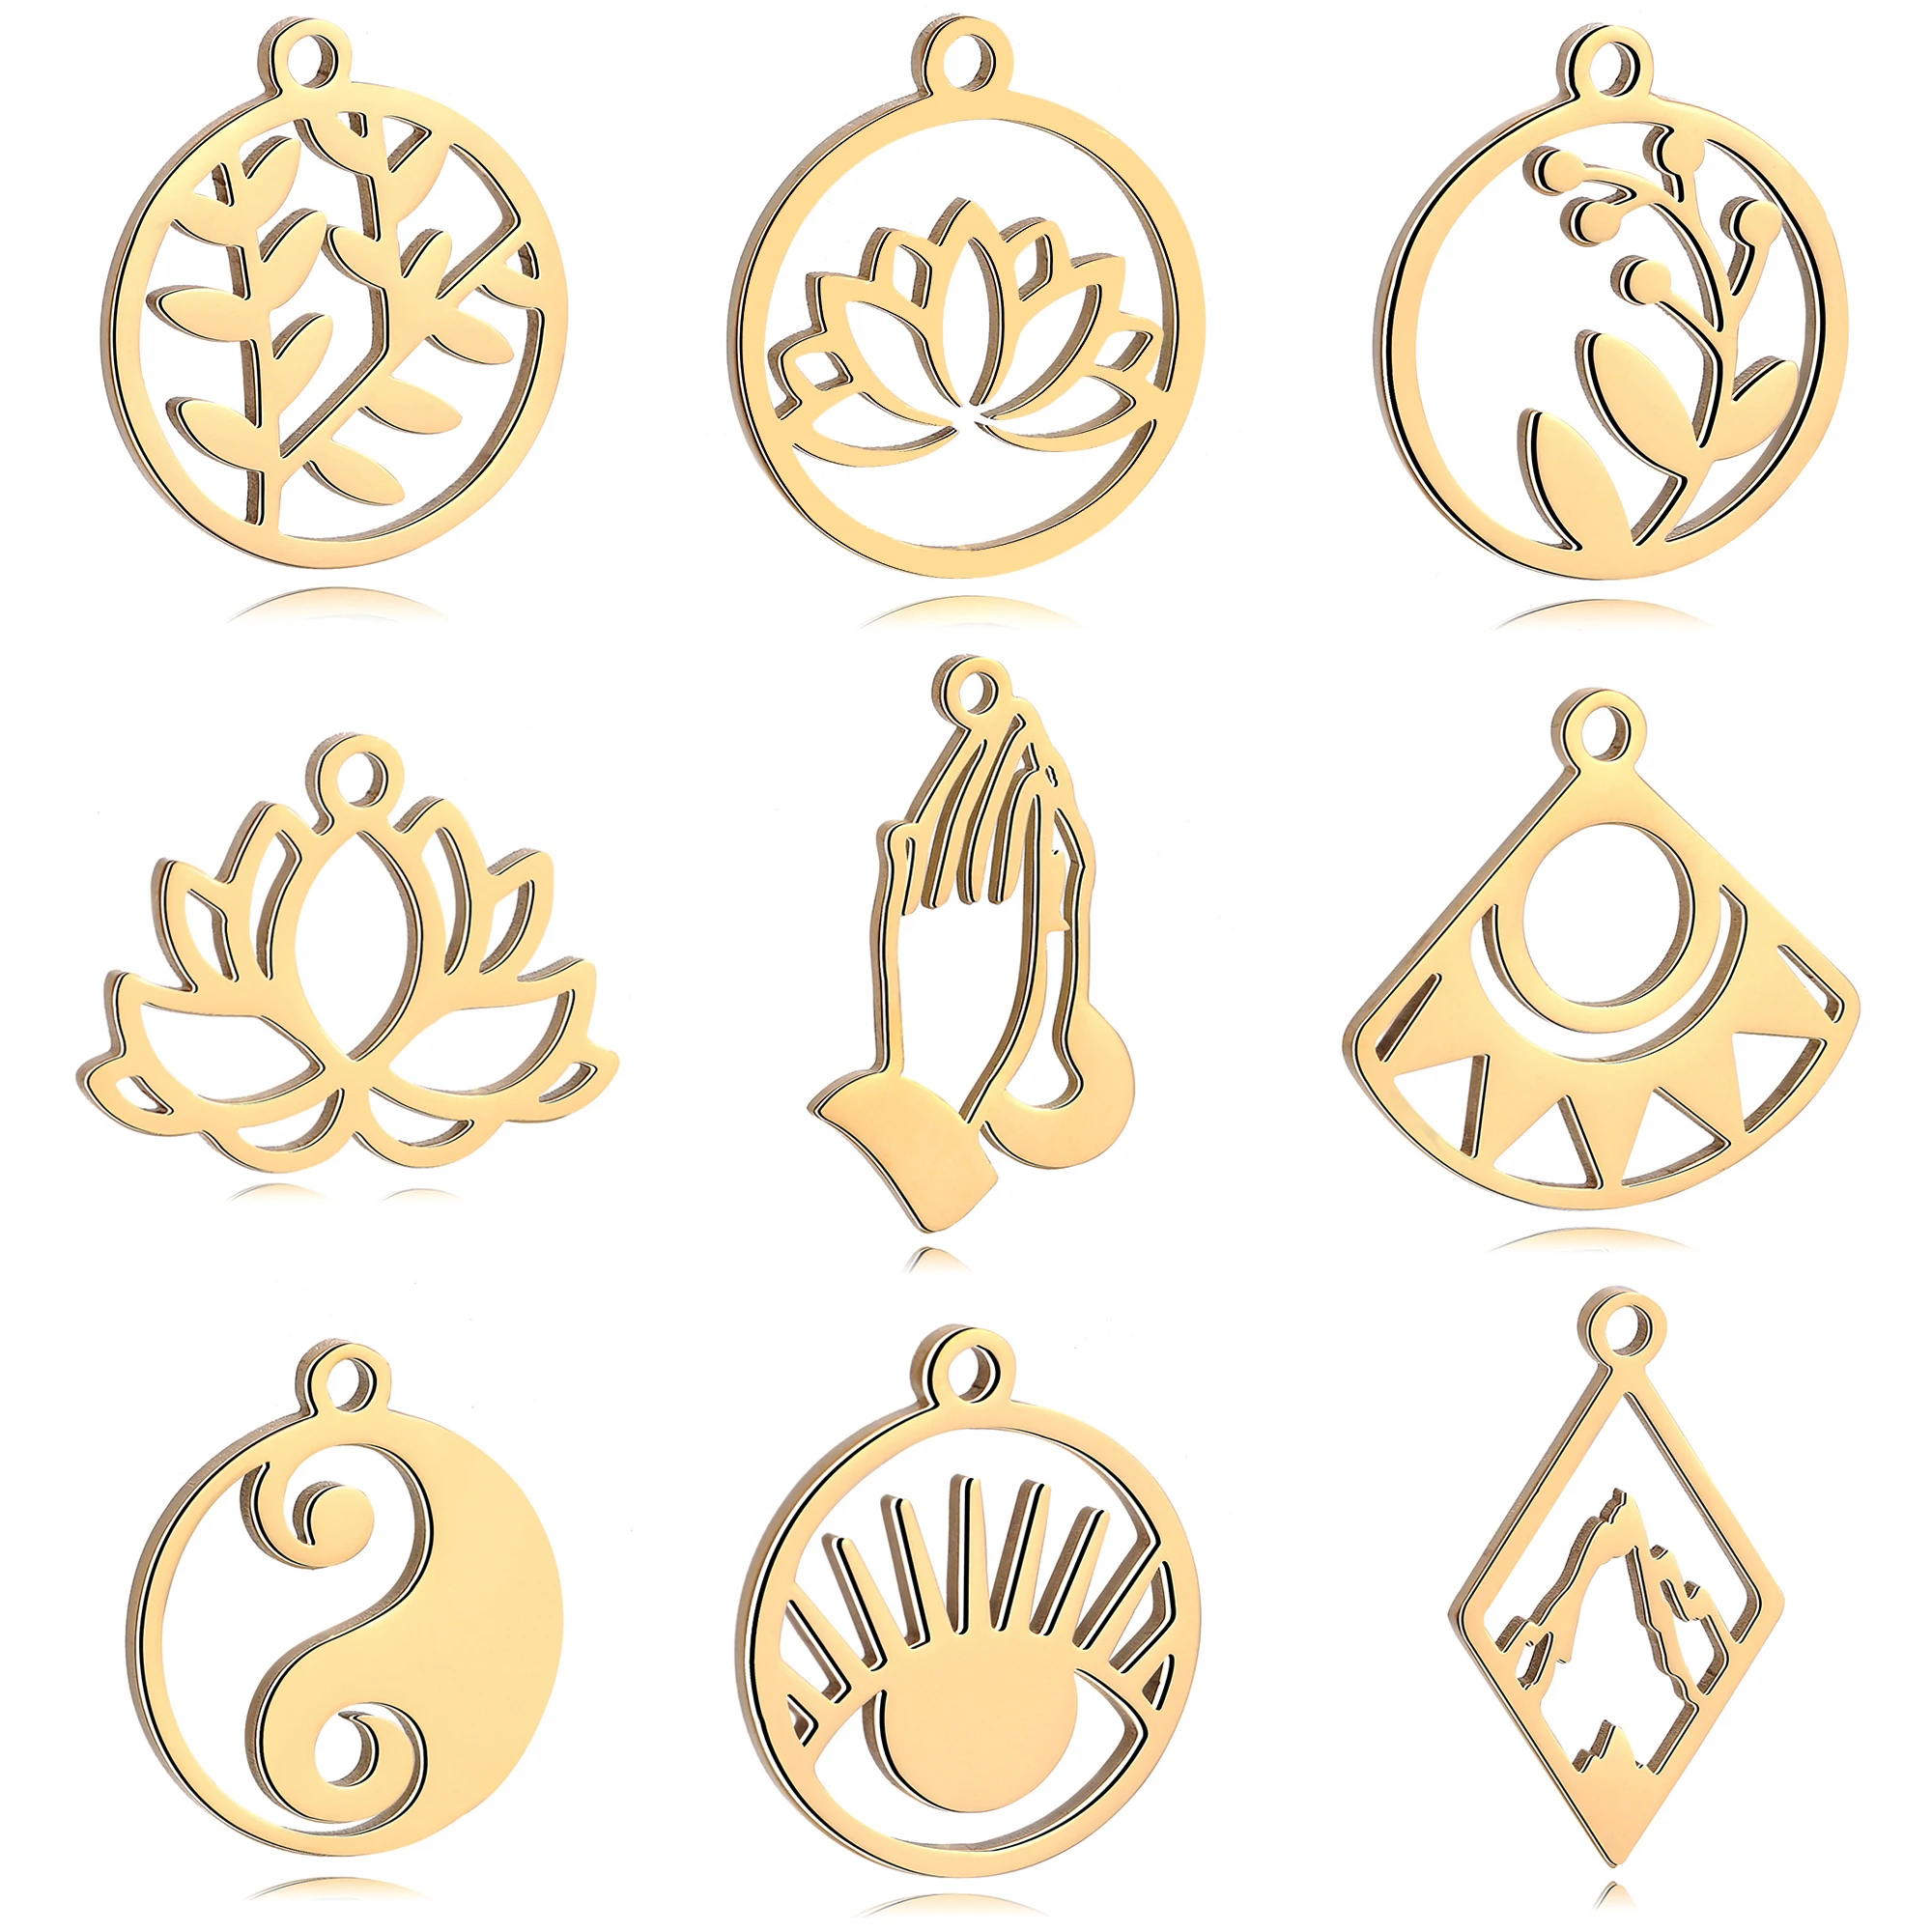 5pc/Lot Stainless Steel Charms For Jewelry Making Yoga Lotus Flower＆Taiji Religion Amulet Pendant Diy Earrings Necklace Bracelet